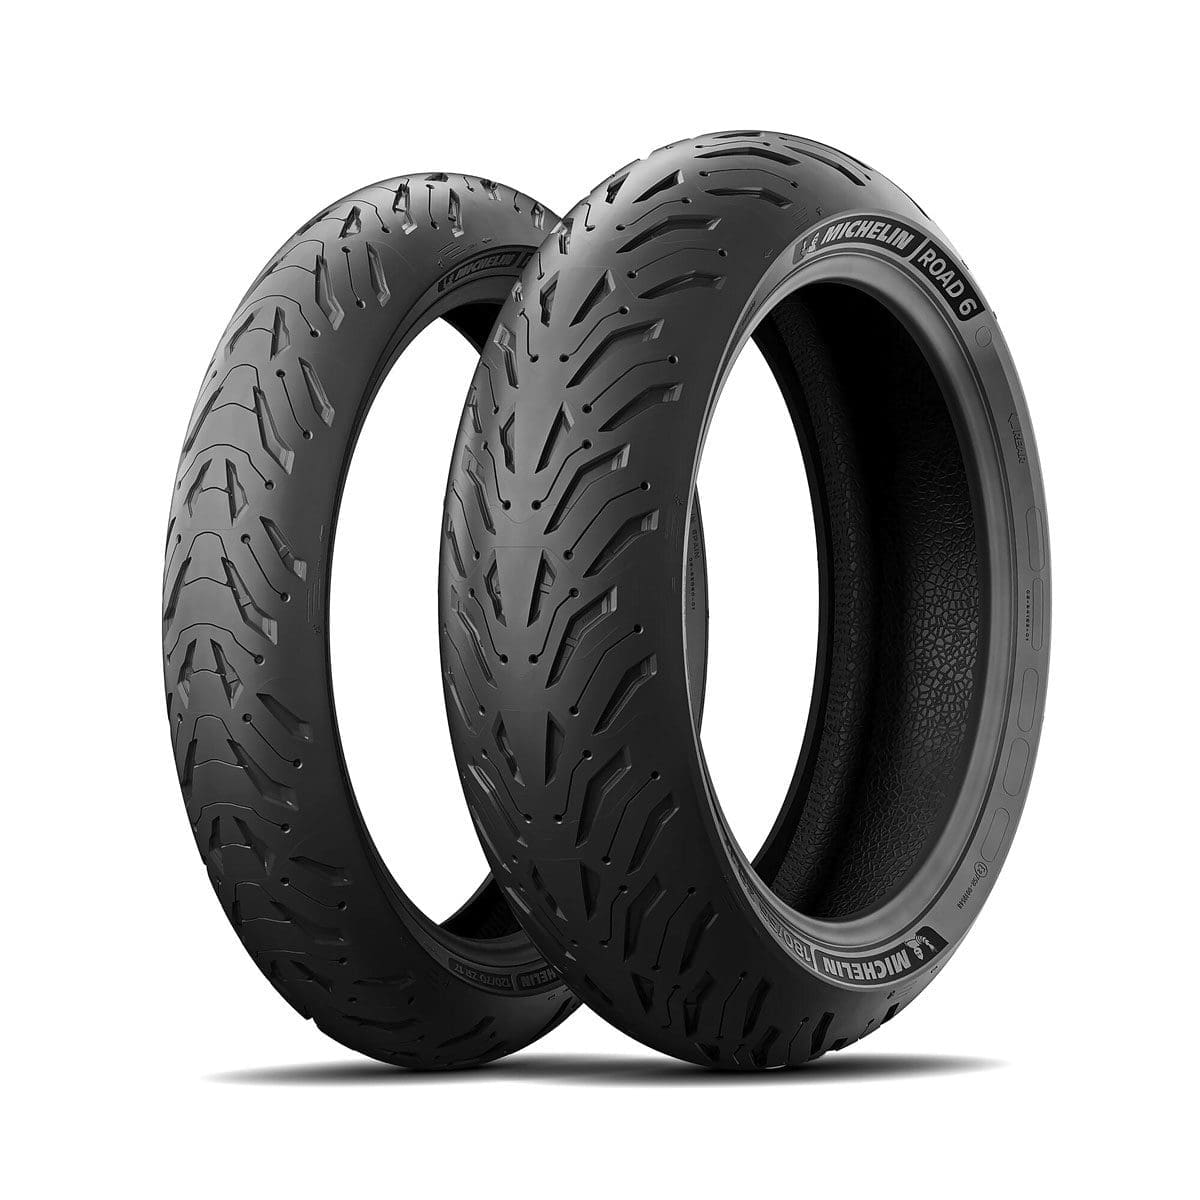 Michelin Road 6 Tyres